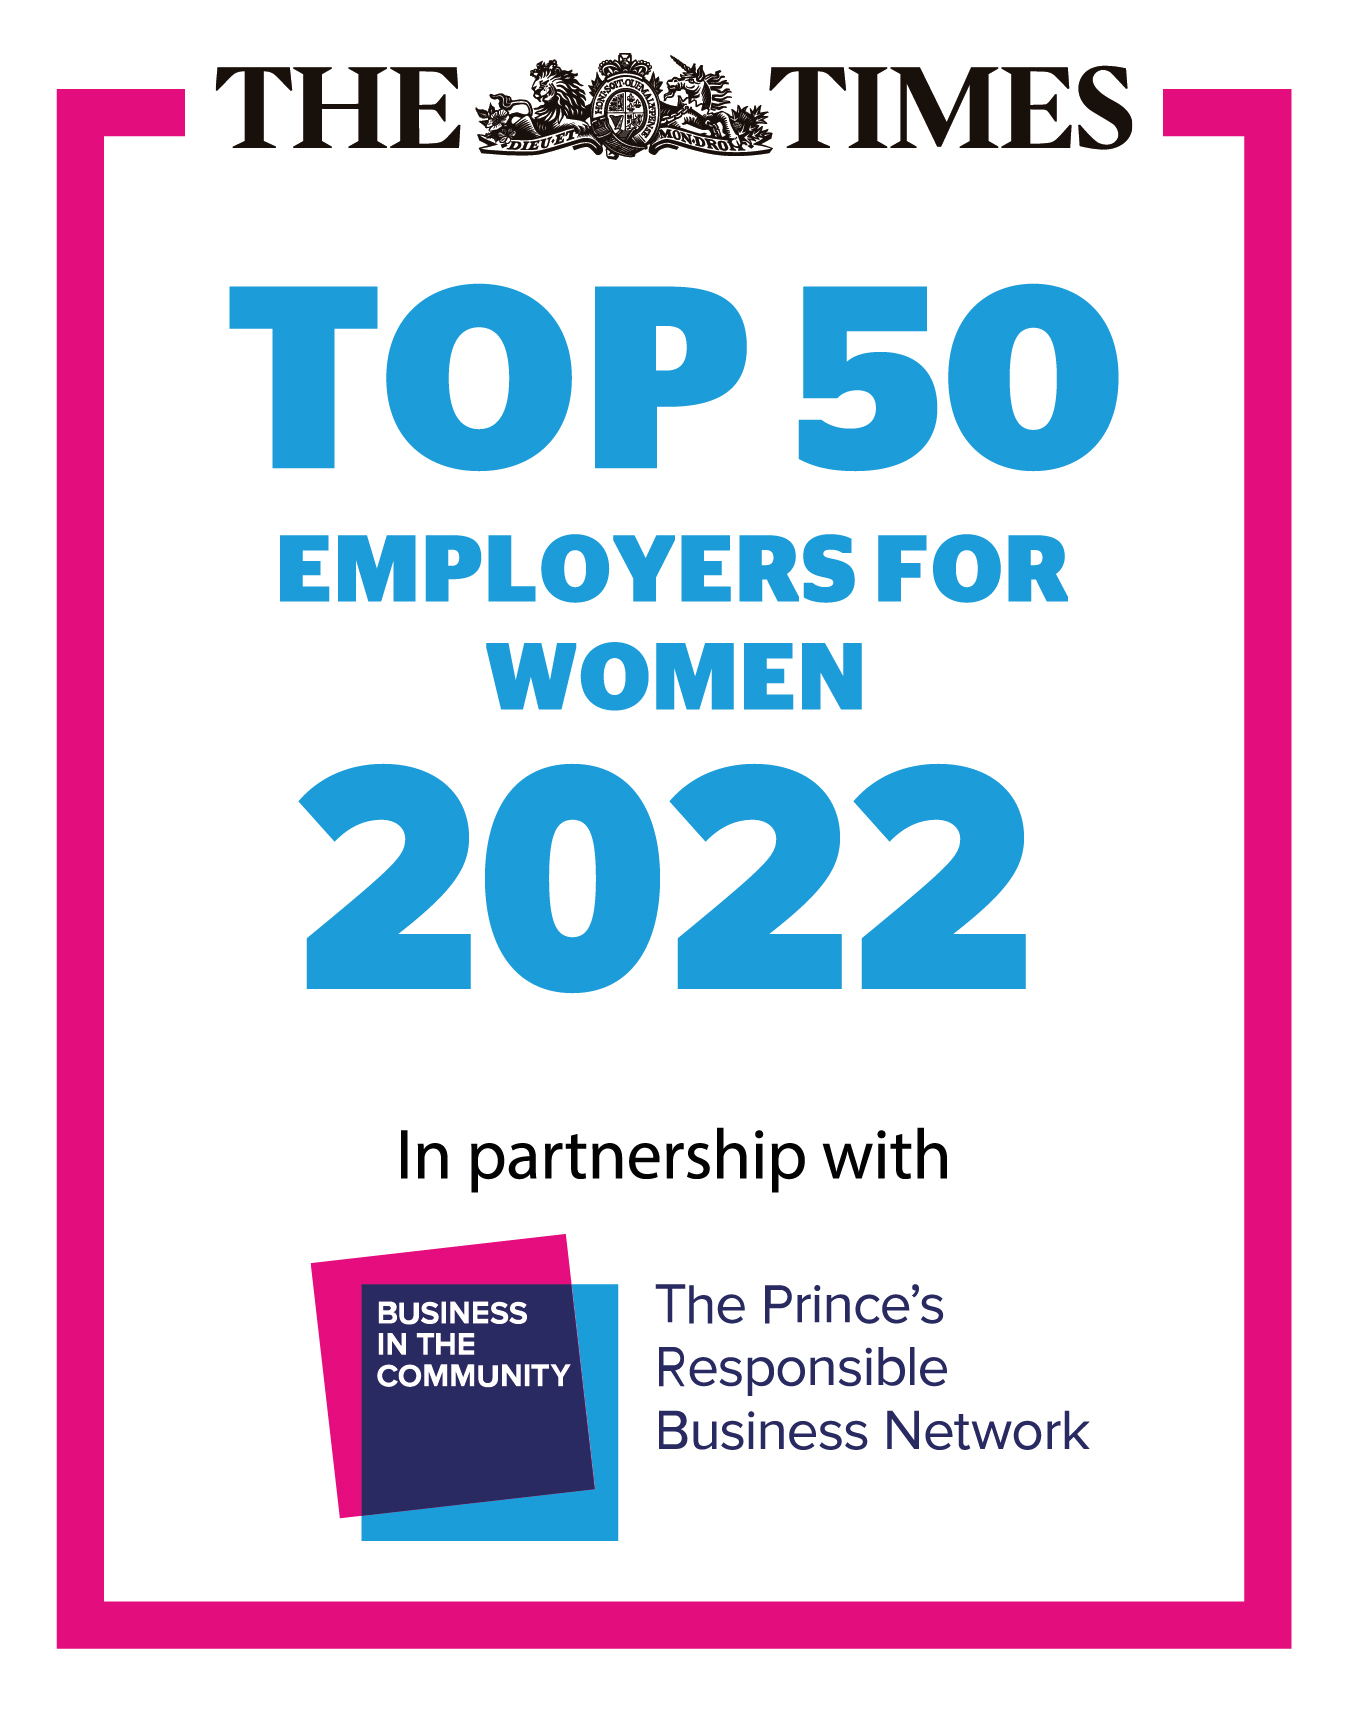 Times Top 50 Employers for Women.jpg